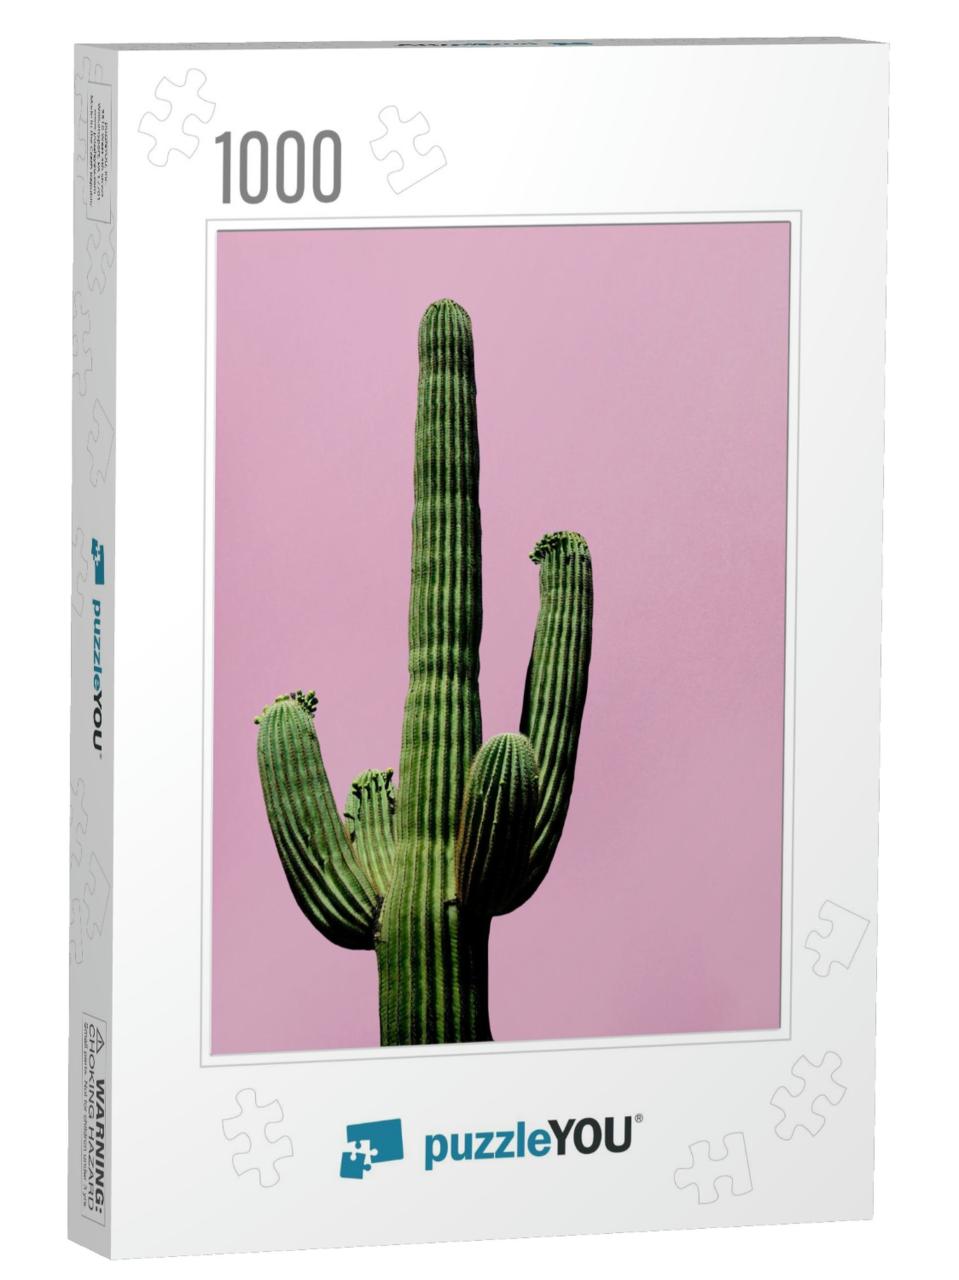 Cactus on the Pink Background Minimal Creative Still Life... Jigsaw Puzzle with 1000 pieces